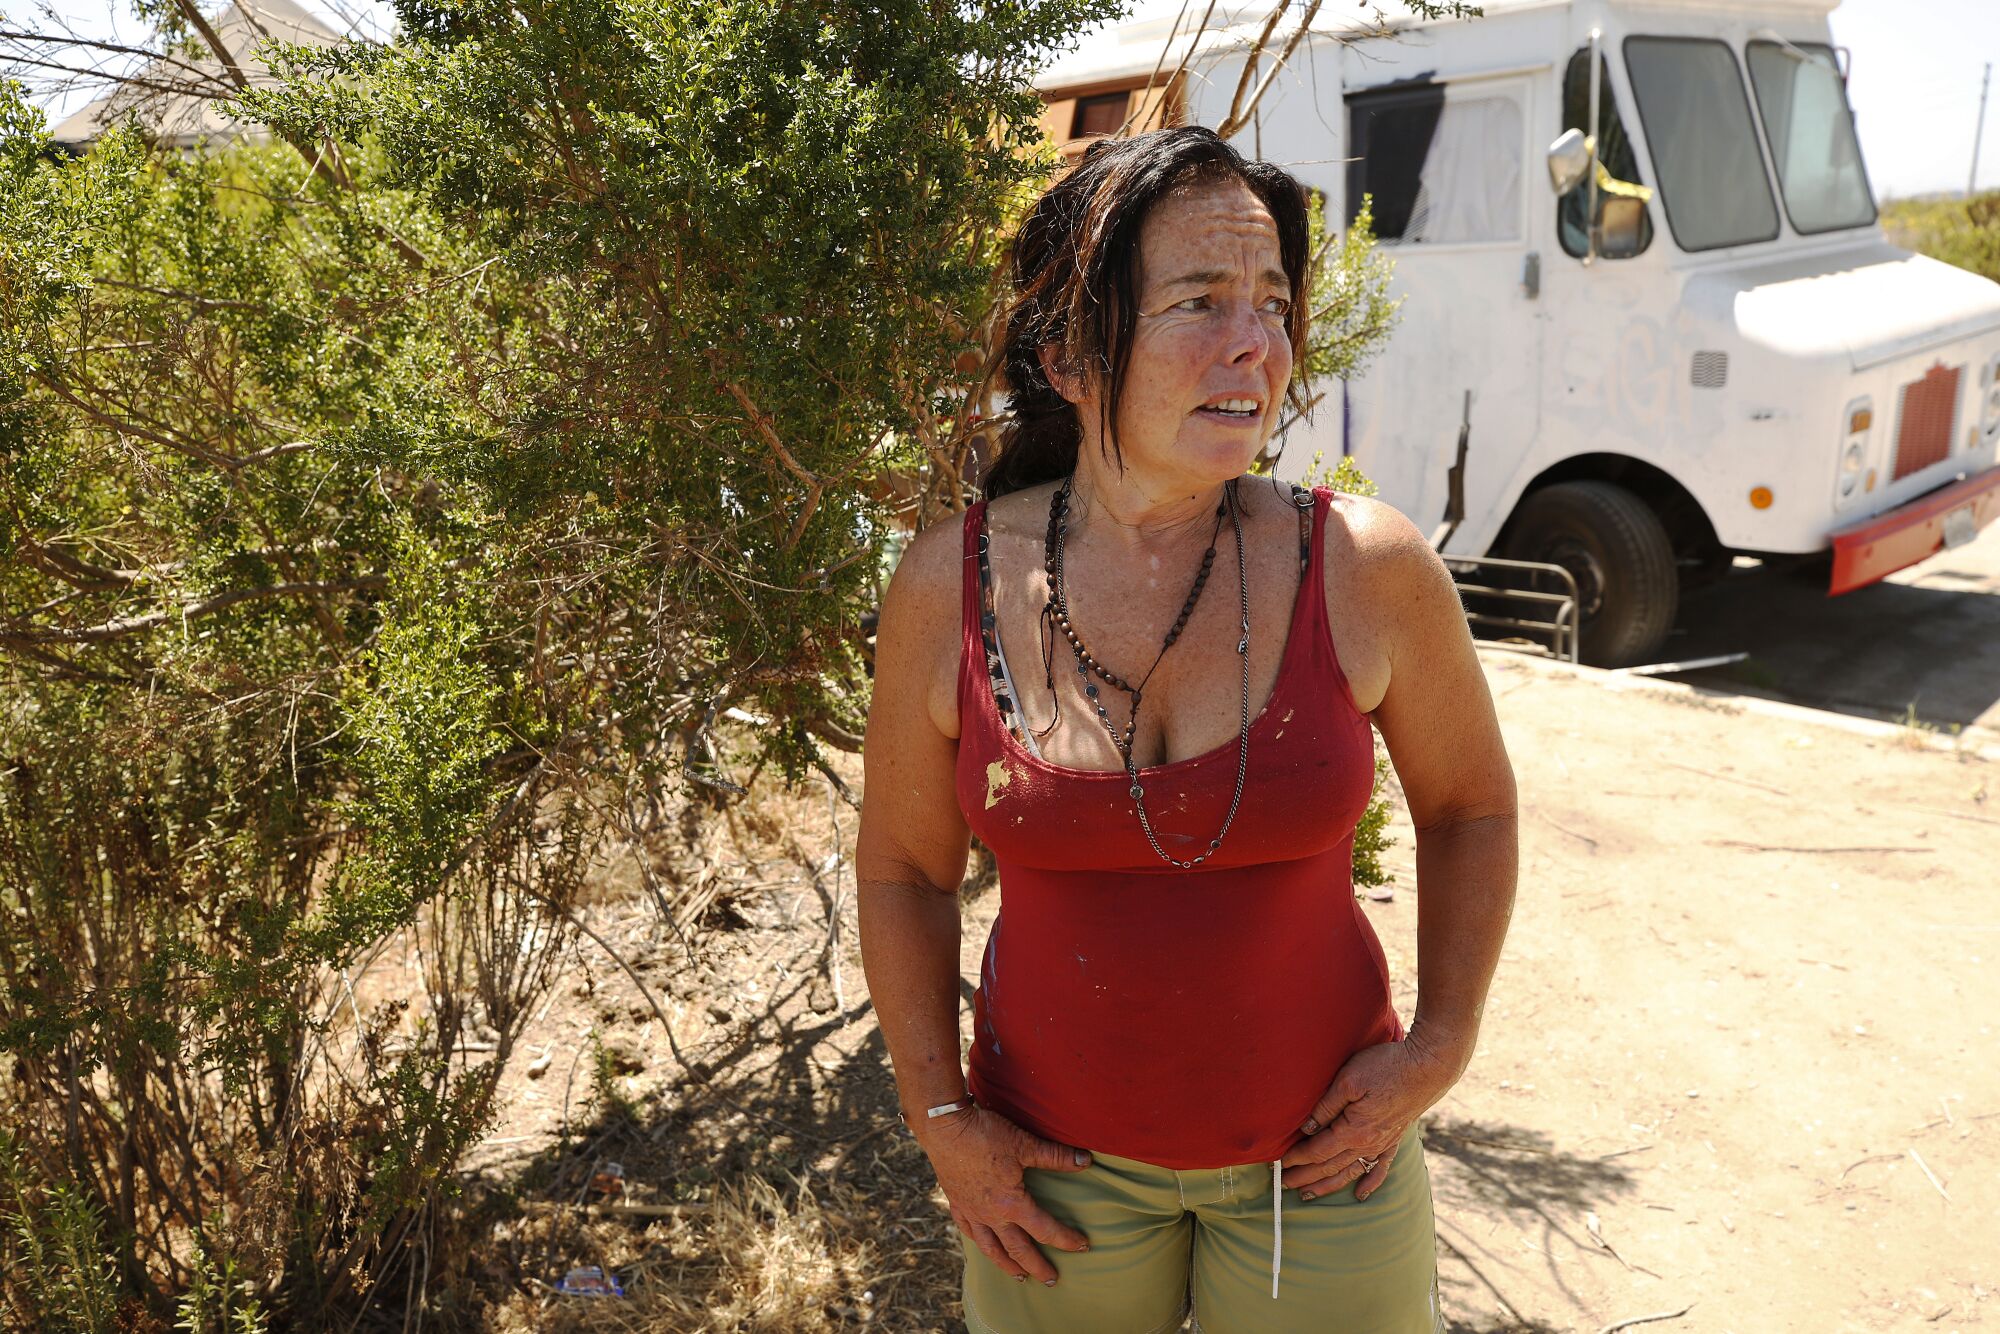 Wendy Lockett, 52, is among those living in campers near the Ballona Wetlands.